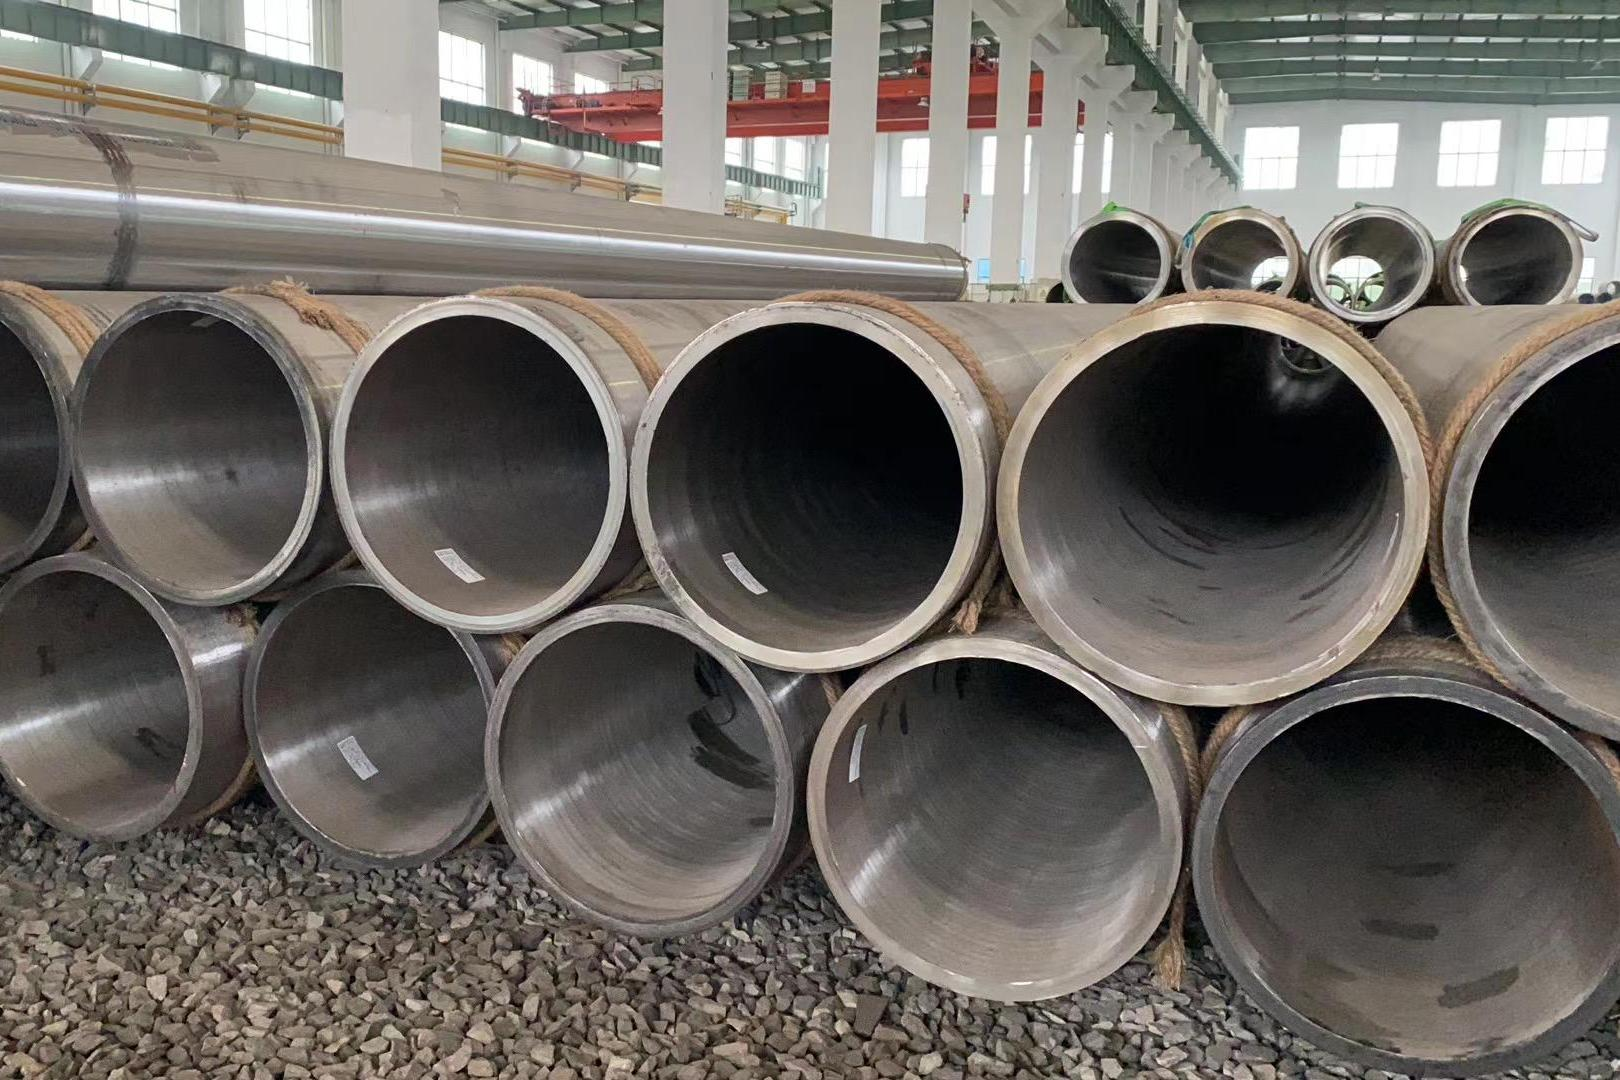 What is the seamless steel pipe used for, how much do you know?